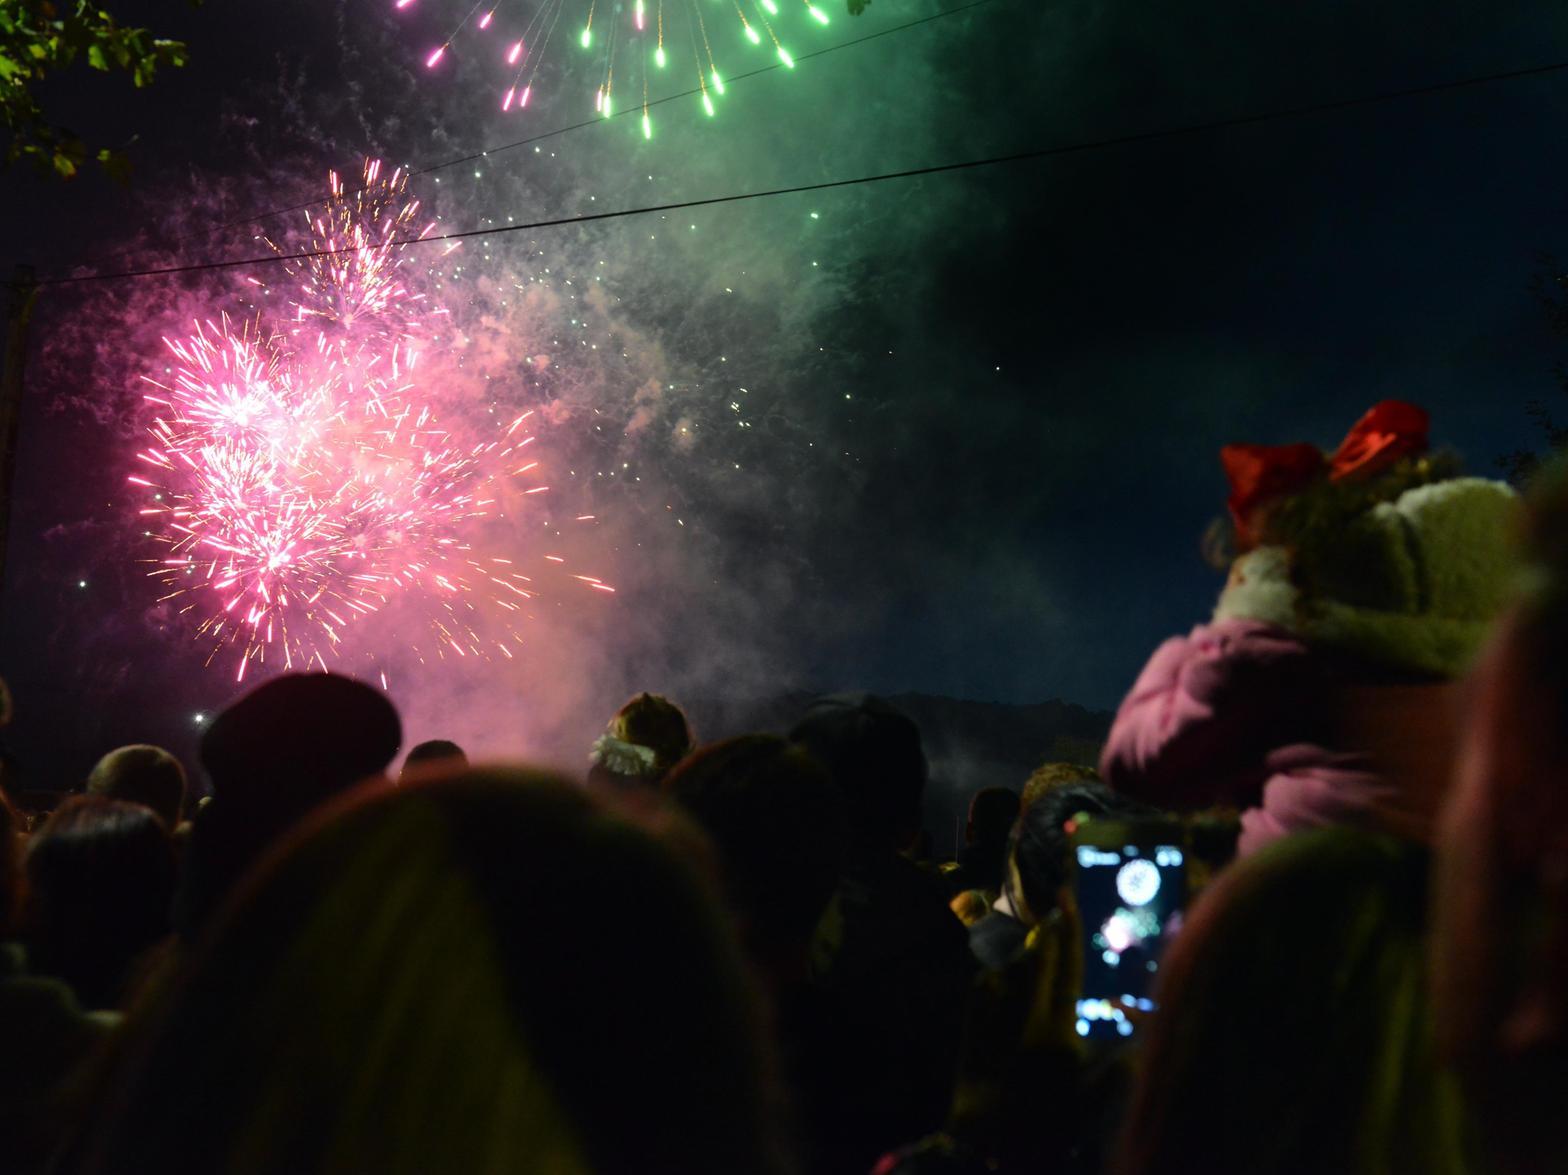 Bridlington Rugby Club is hosting a firework display. Gates will open from 6pm and the fireworks begin between 7.30pm and 8pm.